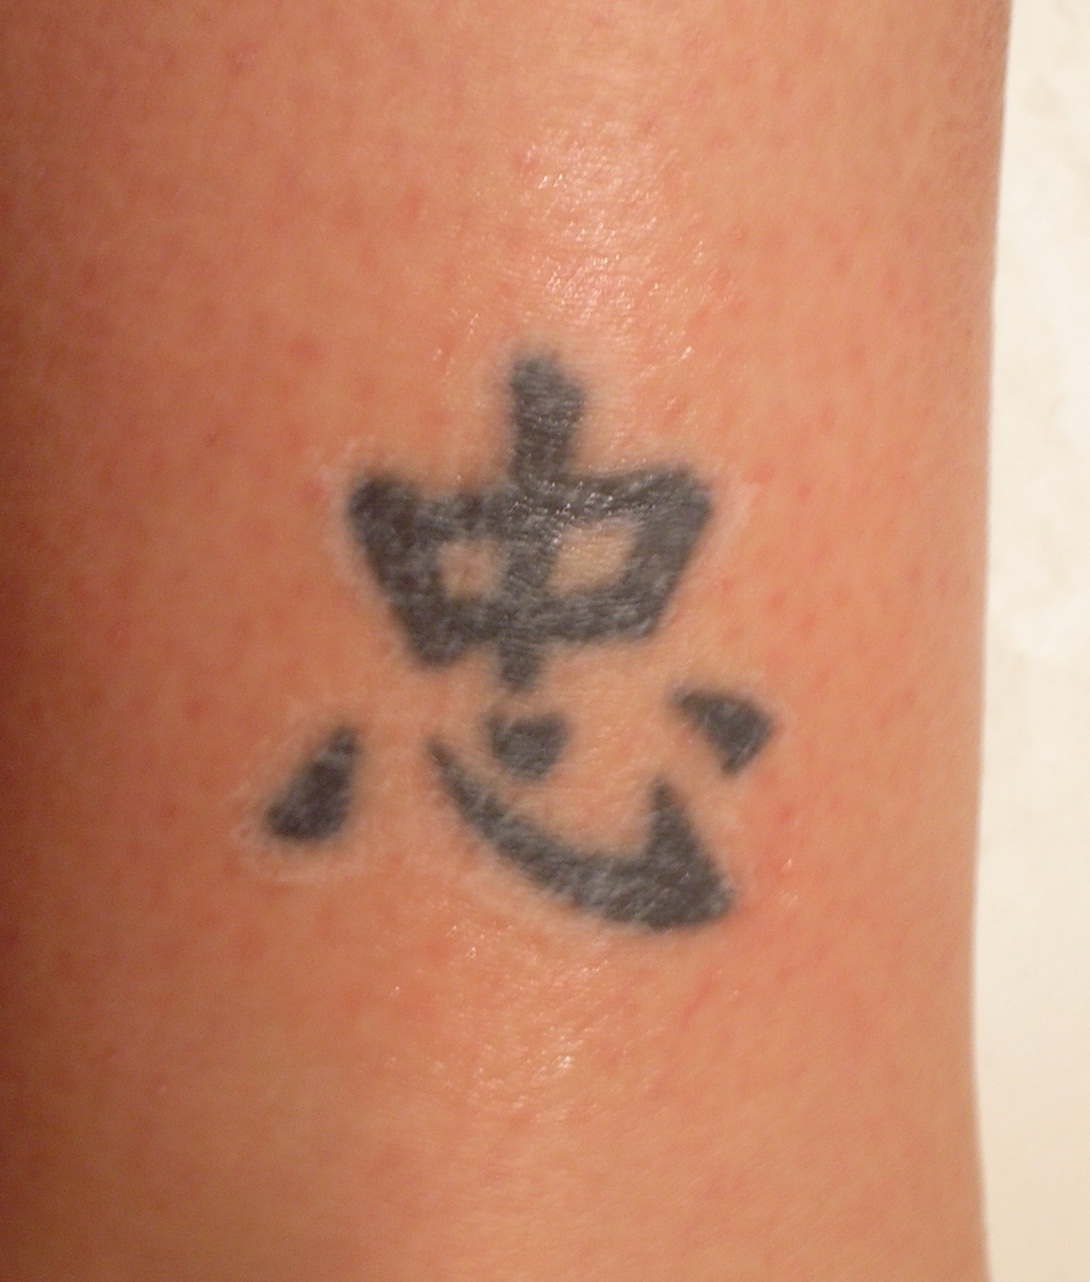 2nd Treatment, about 70% | Documenting TCA Tattoo Removal